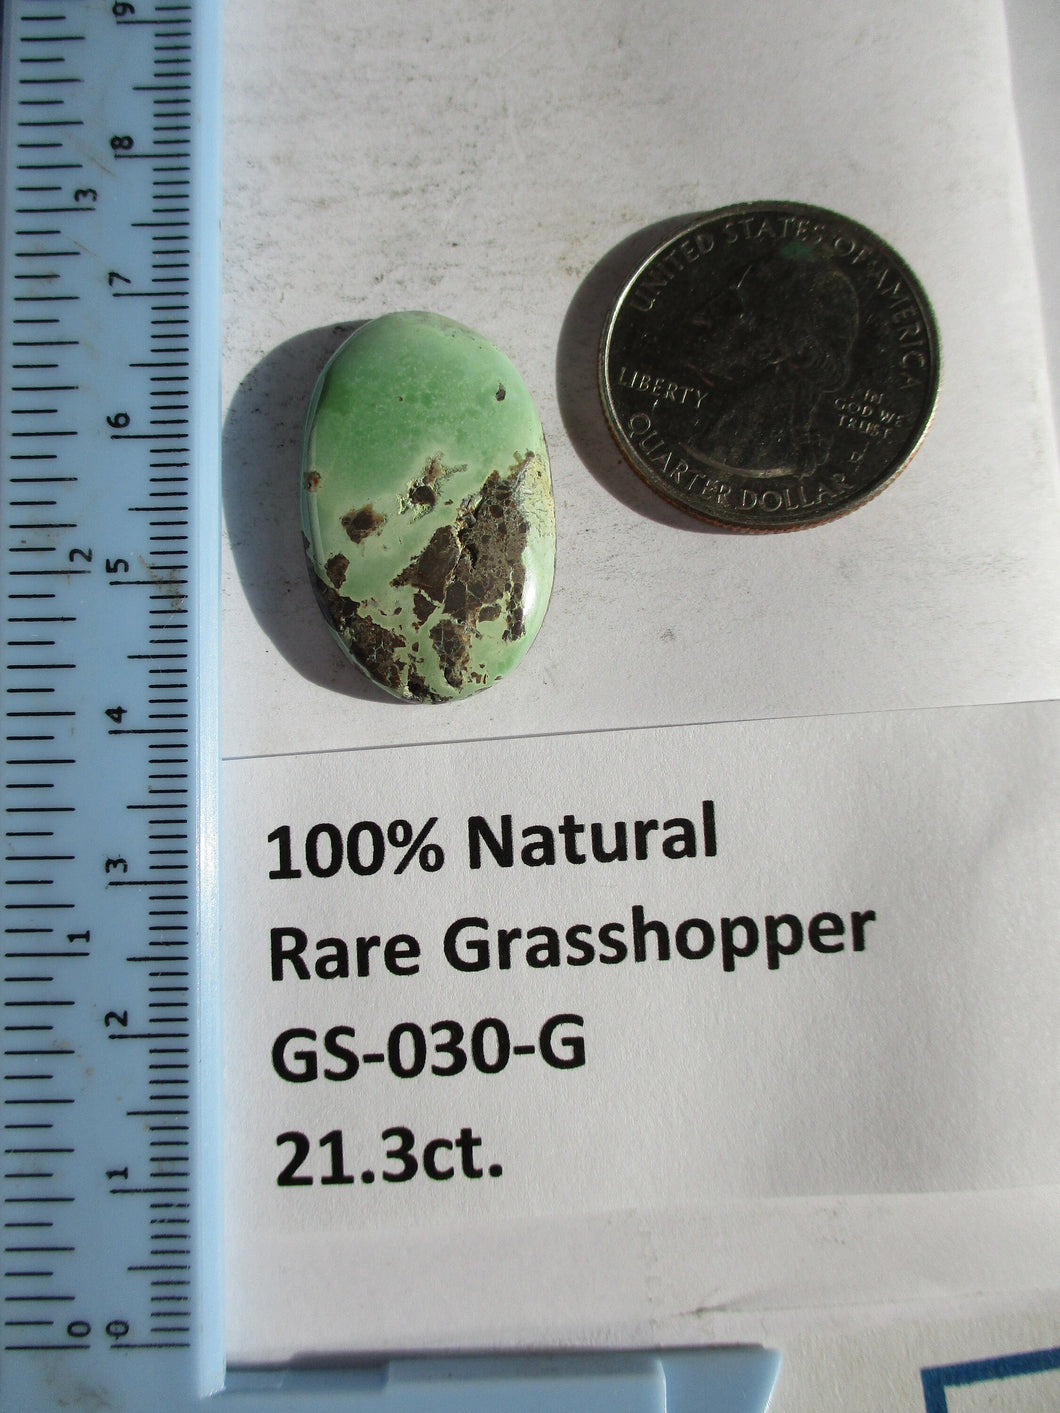 21.3 ct. (28x17x5 mm) 100% Natural Rare Grasshopper Turquoise Cabochon Gemstone, GS 030 s